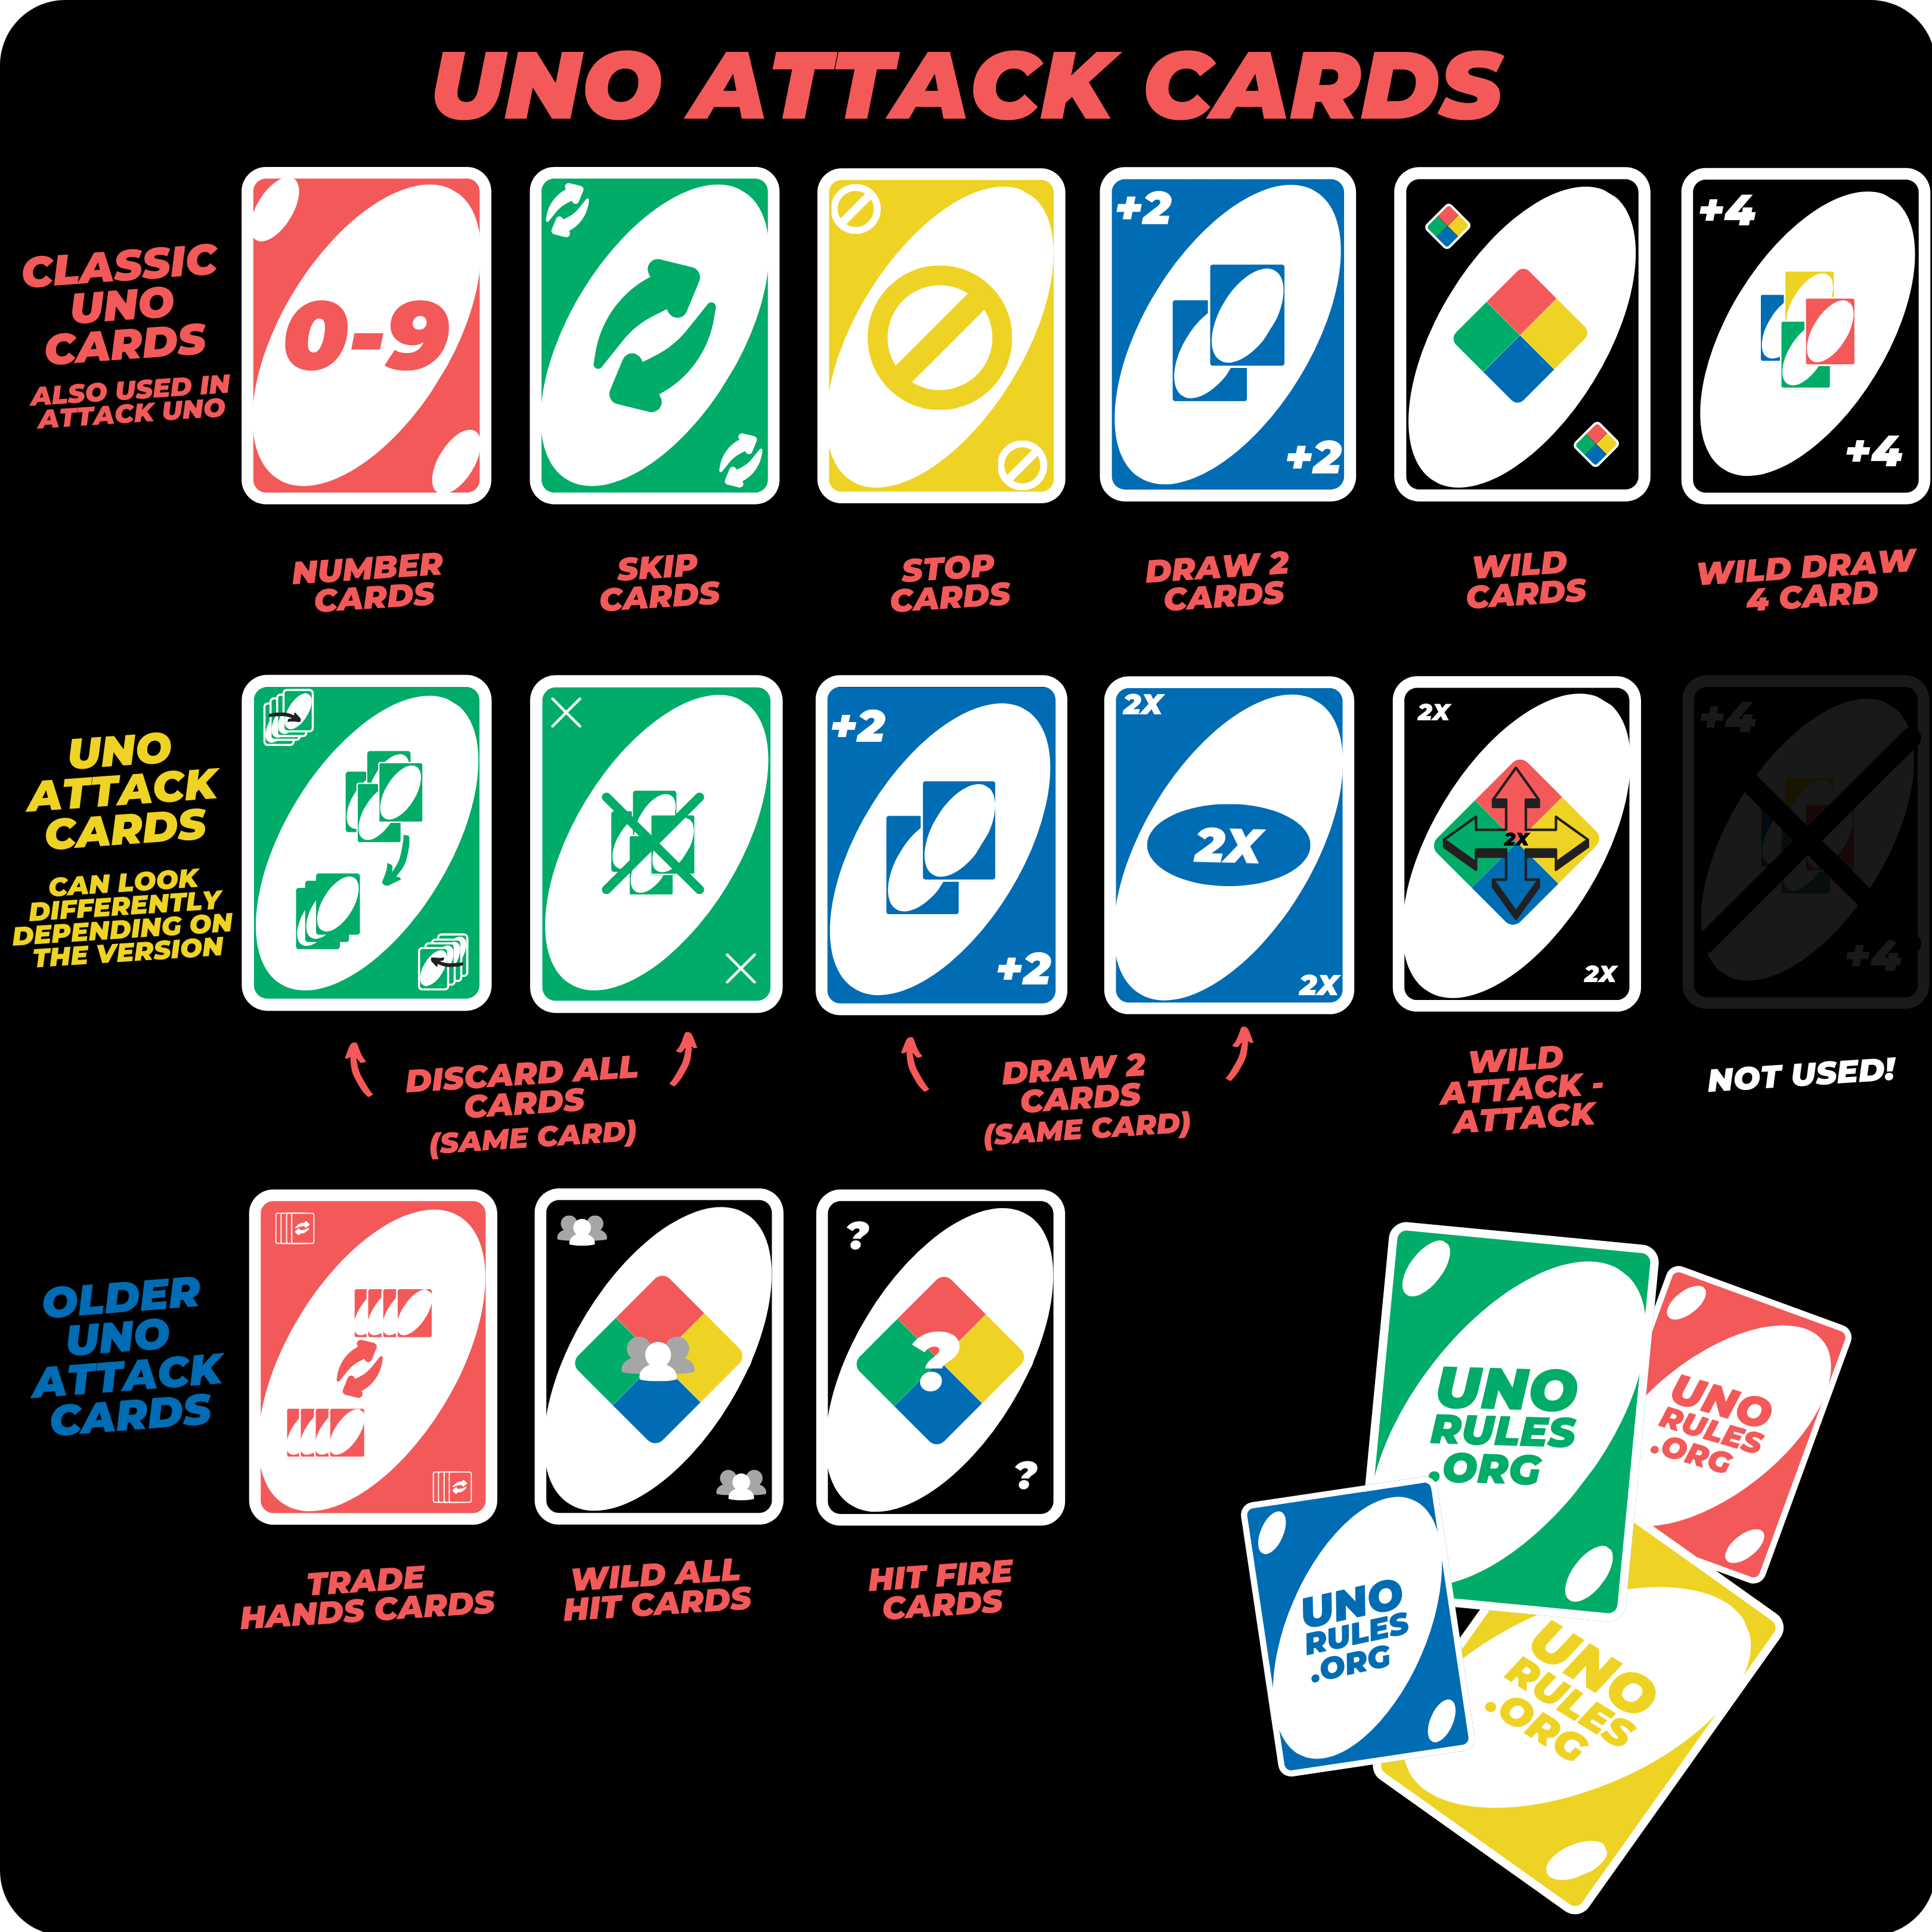 Uno Attack Rules - What are the uno attack rules and card meanings?